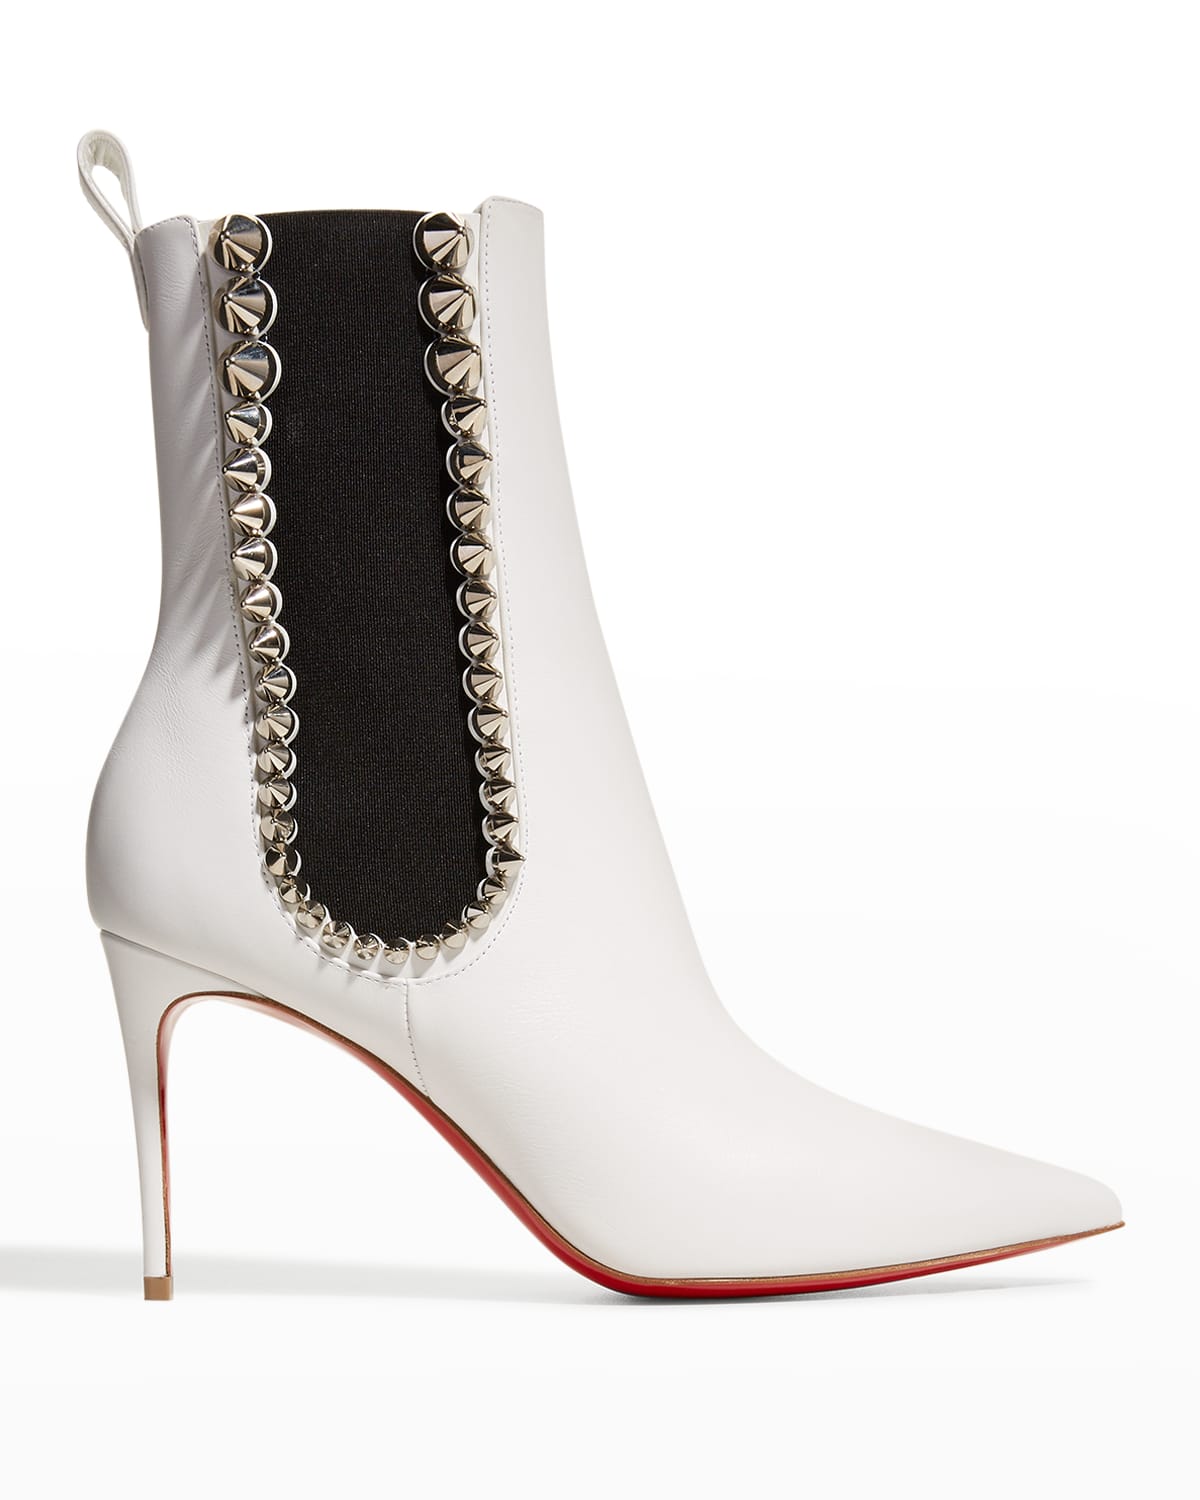 Christian Louboutin Spikita Booty 85mm Red Sole Ankle Boots